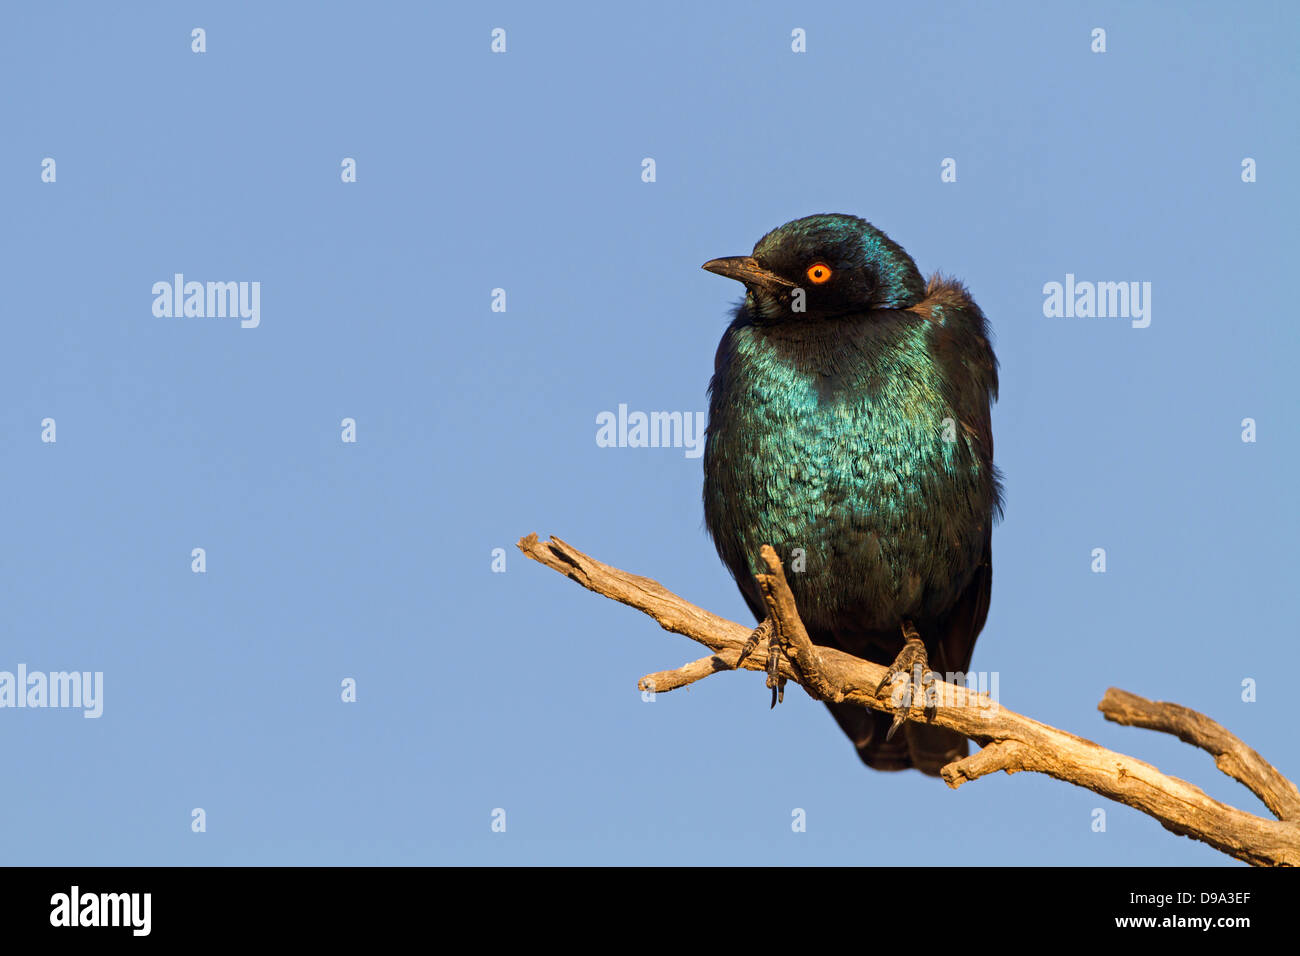 Red-shouldered Glossy Starling, Red-shouldered Glossy-Starling, Lamprotornis nitens, Rotschulter-Glanzstar Stock Photo